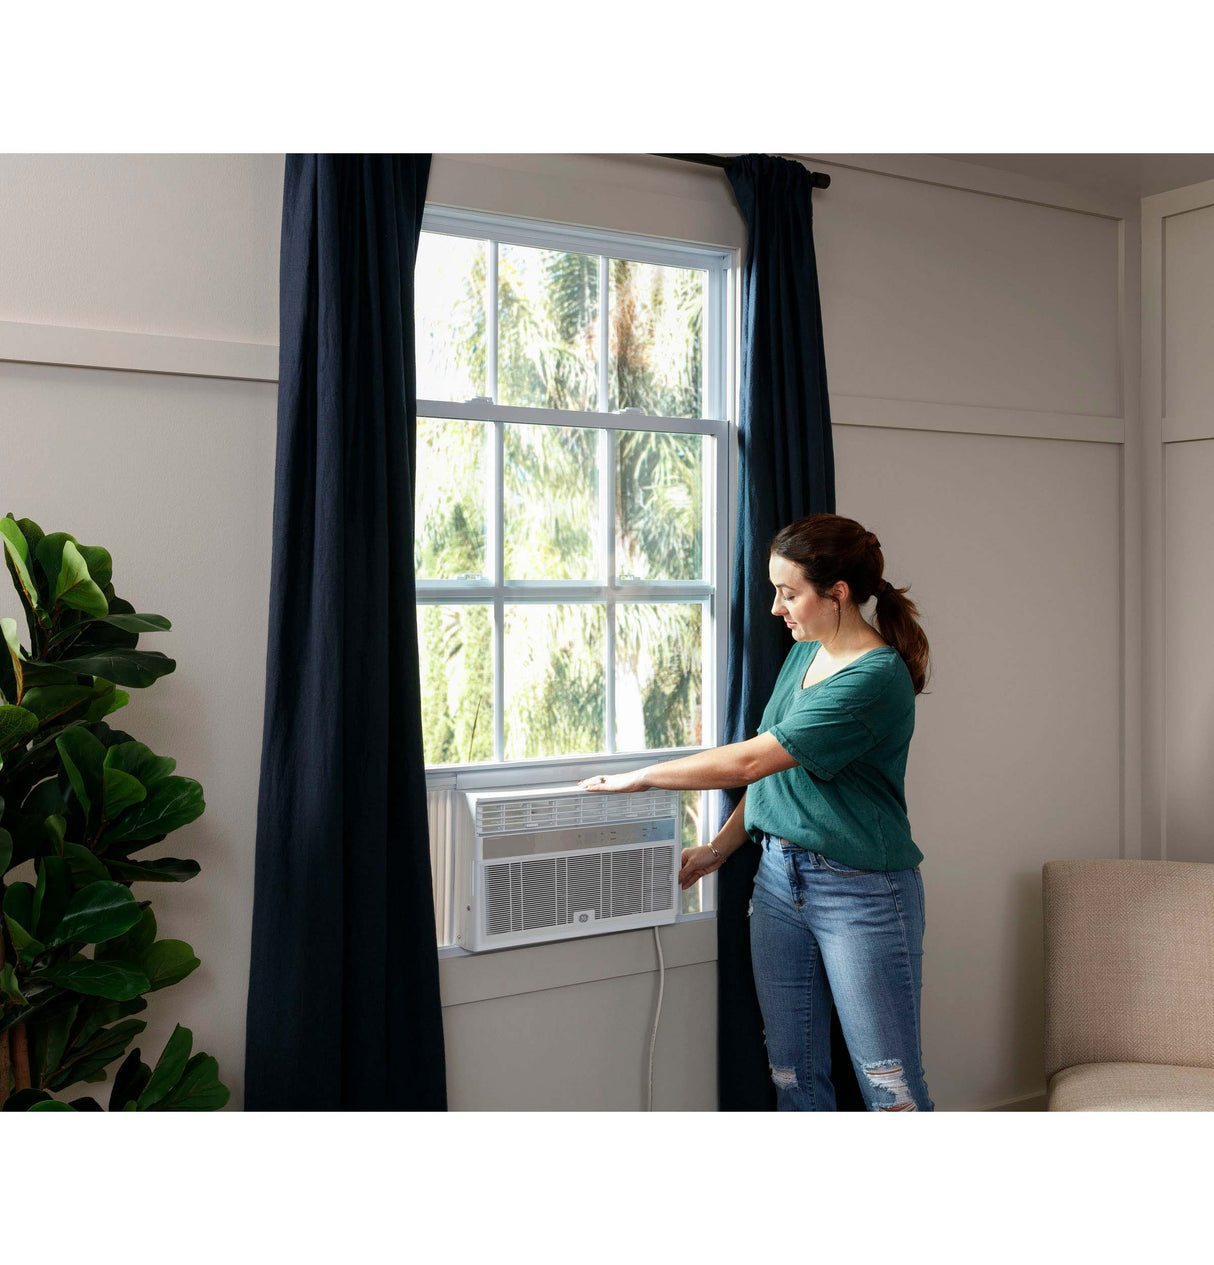 GE(R) ENERGY STAR(R) 14,000 BTU Smart Electronic Window Air Conditioner for Large Rooms up to 700 sq. ft. - (AHY14LZ)